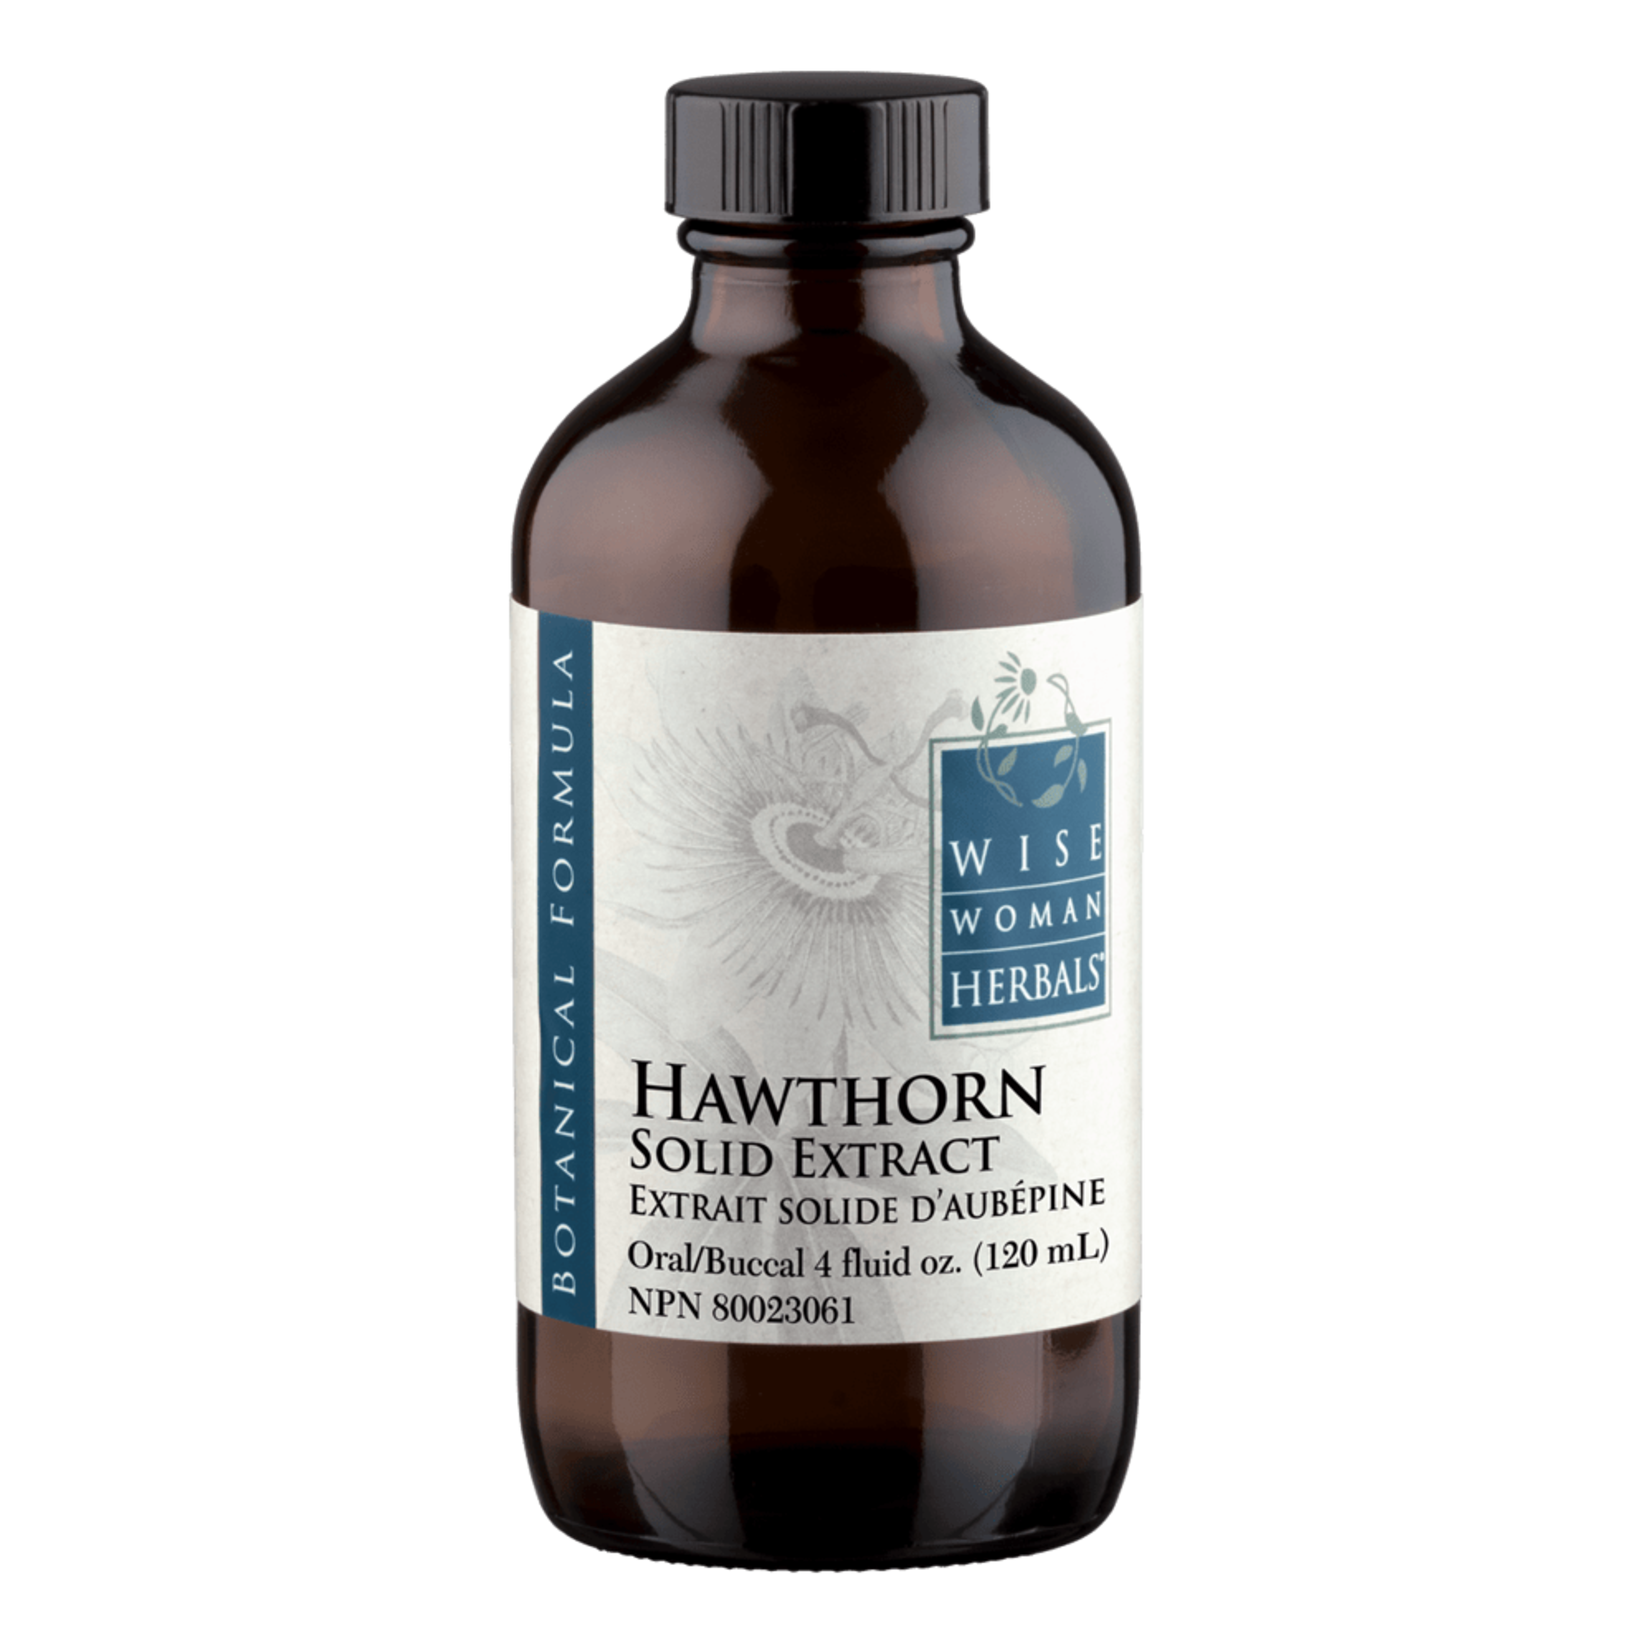 Hawthorn Solid Extract  (Wise Woman Herbals)